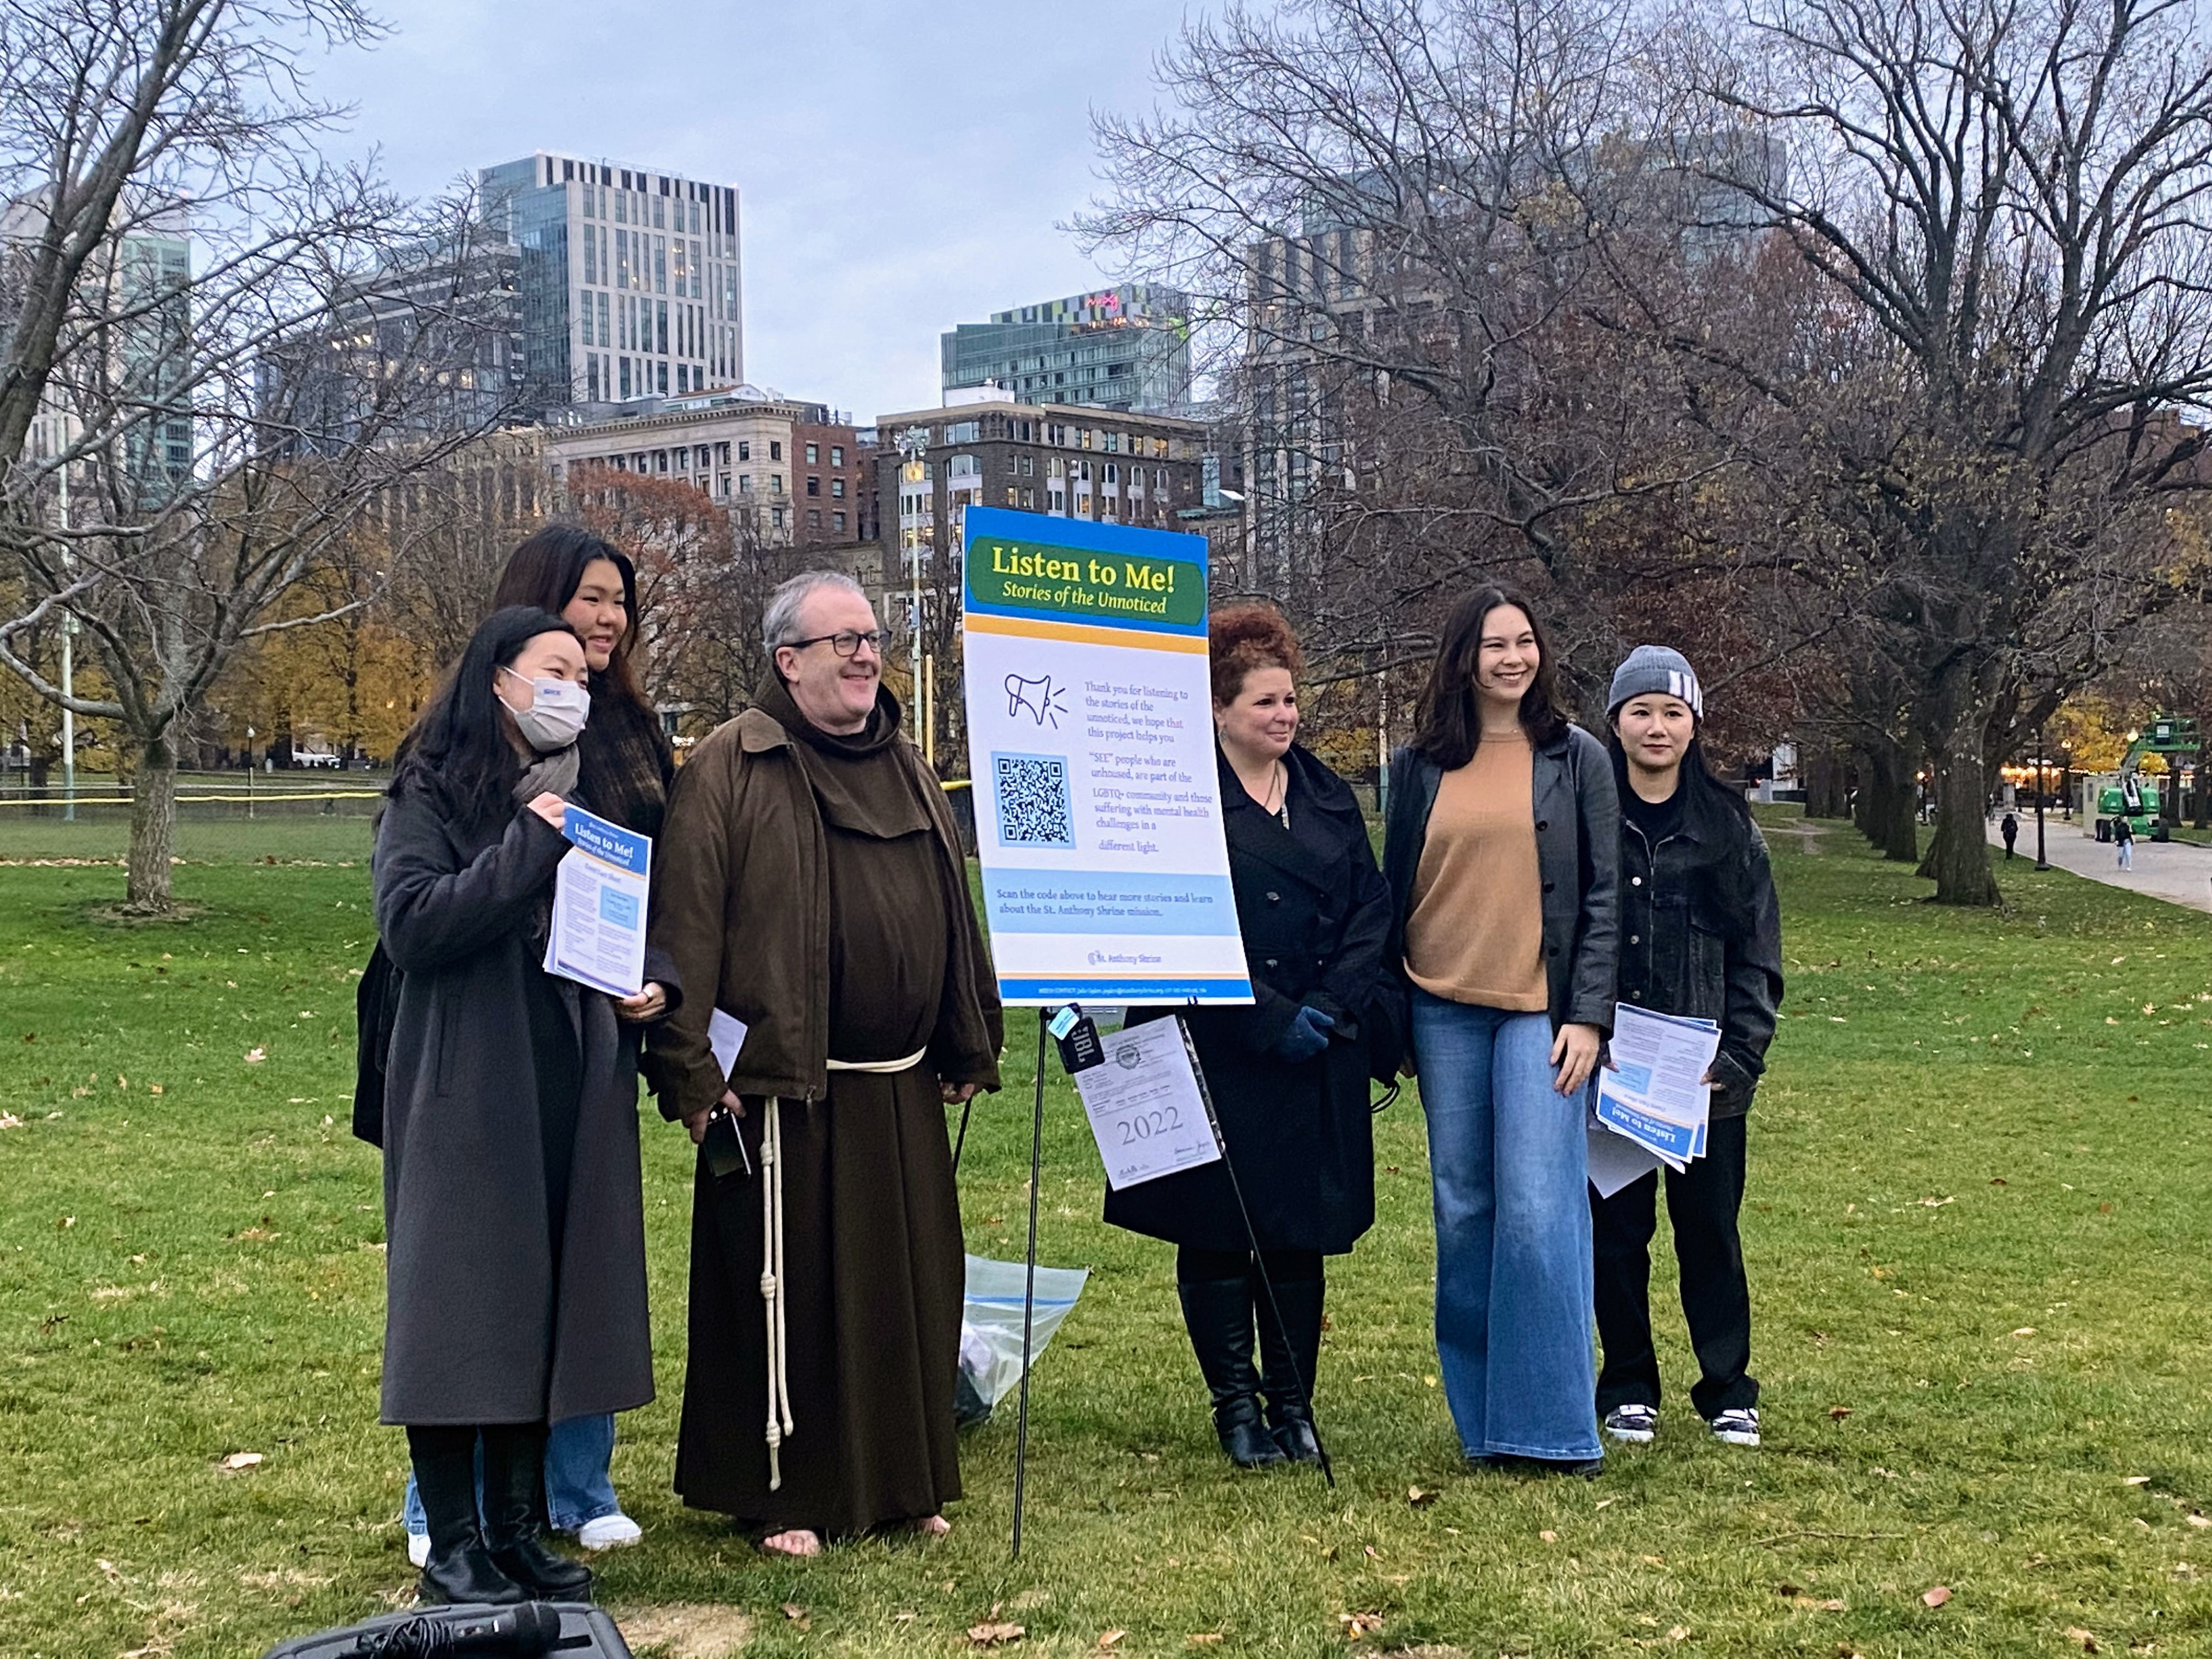 Five college students in winter clothes stand around an older man wearing a Franciscan monk's habit, and a poster-sized display board with the title "Listen to Me! Stories of the unnoticed" on a grassy lawn in Boston Common. Downtown high-rises are visible on the horizon under grey skies.